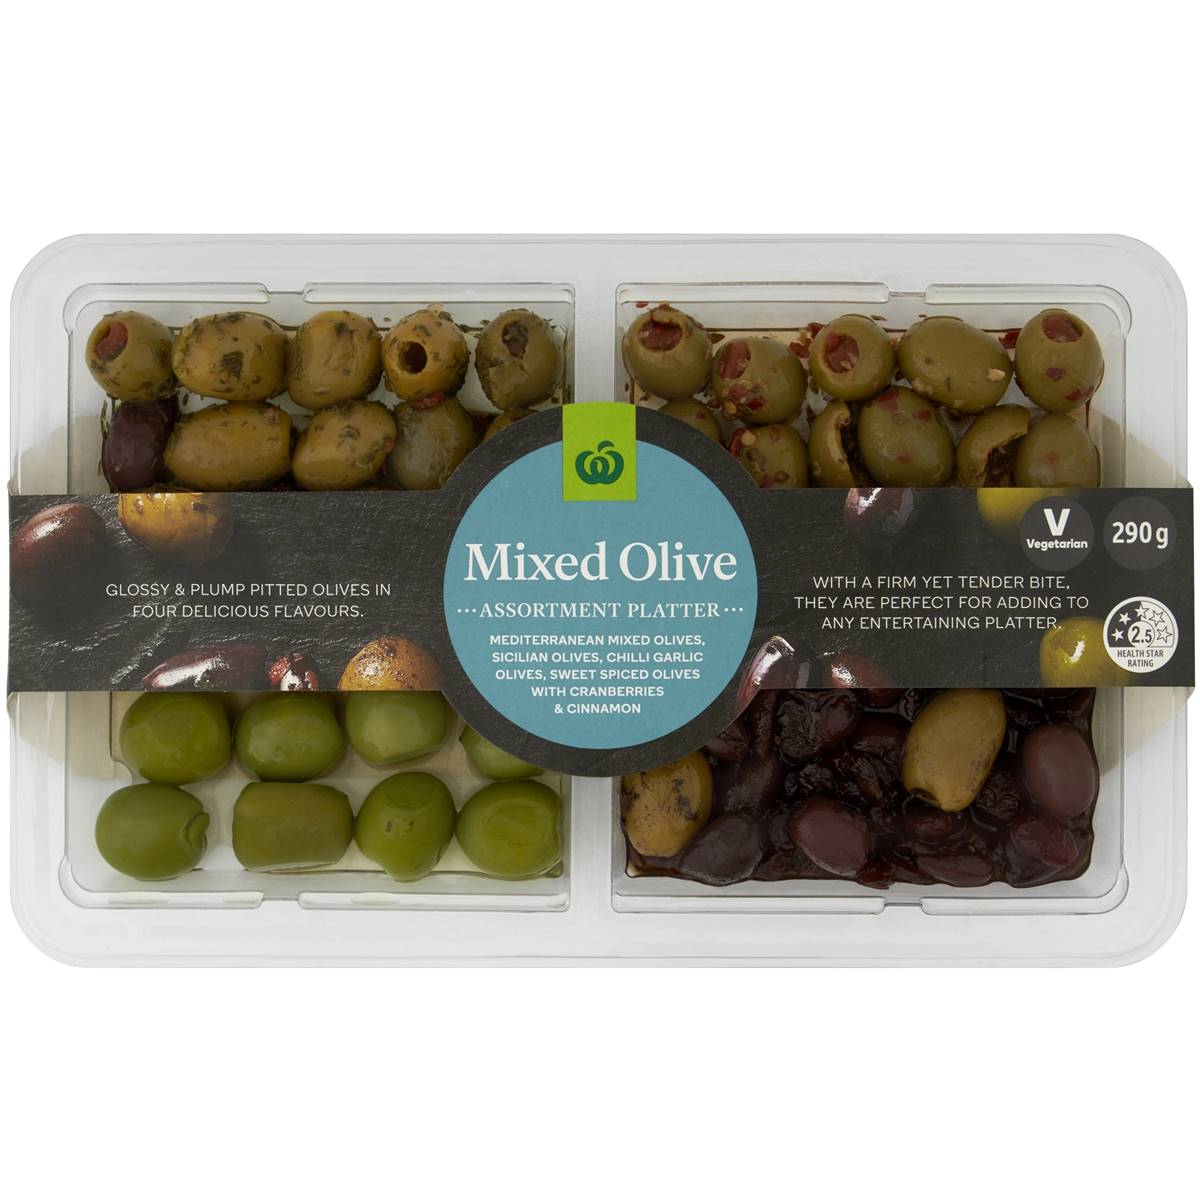 Calories in Woolworths Mixed Olive Assortment Platter